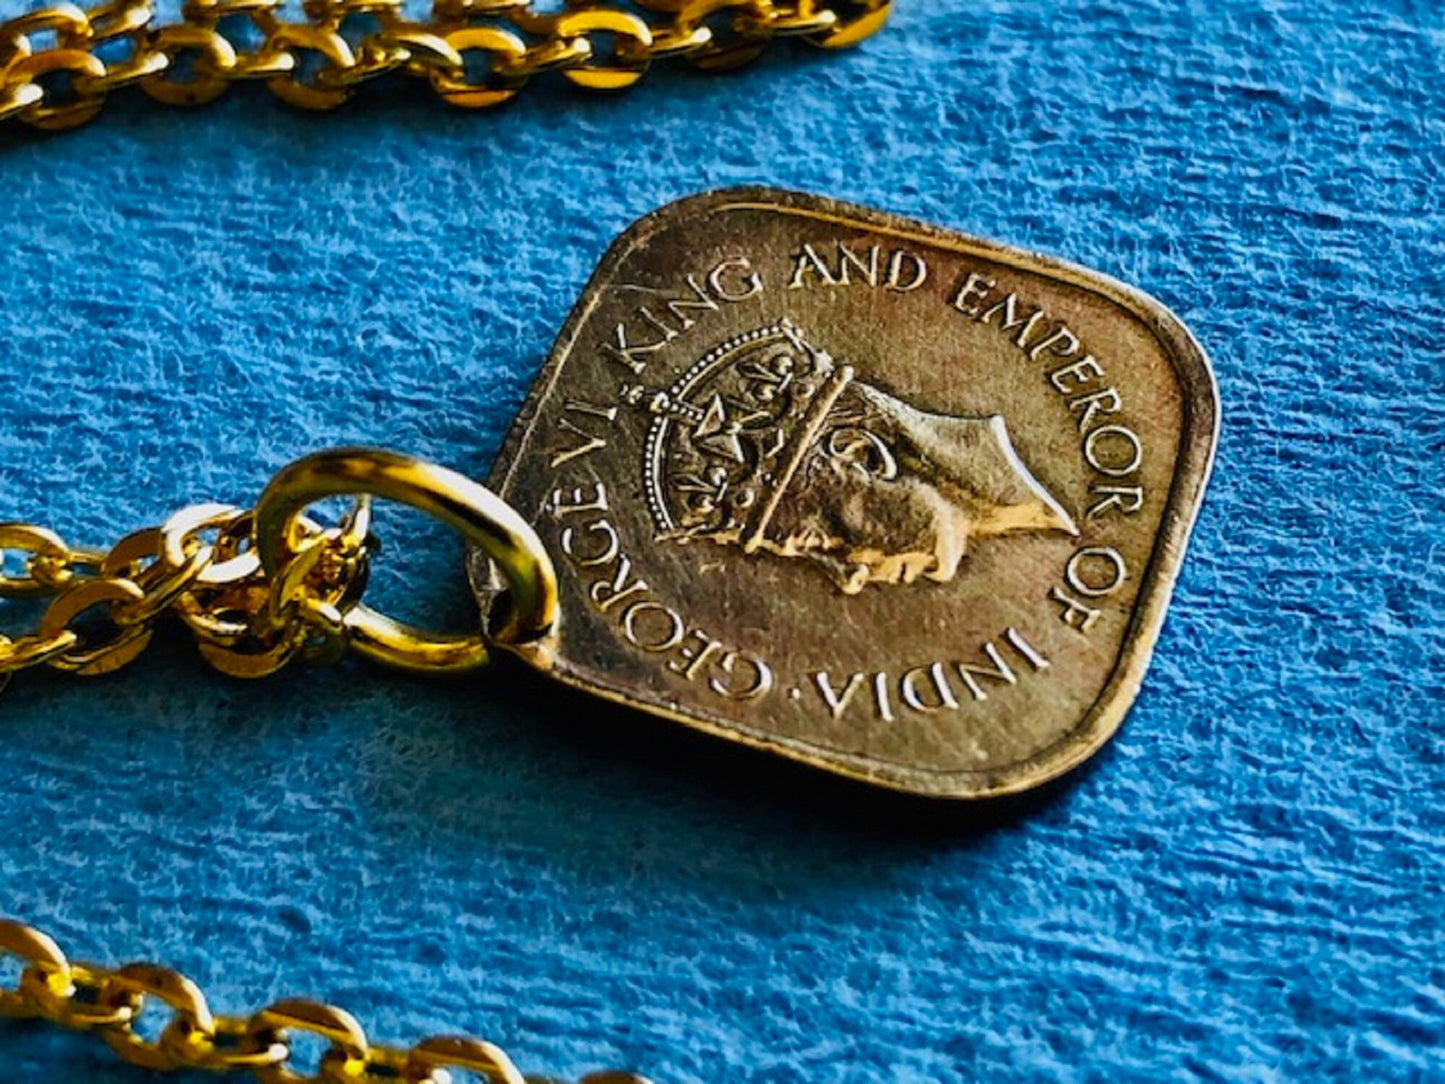 Sri Lanka Coin Necklace Ceylon 5 Cents Pendant Personal Old Vintage Handmade Jewelry Gift Friend Charm For Him Her World Coin Collector